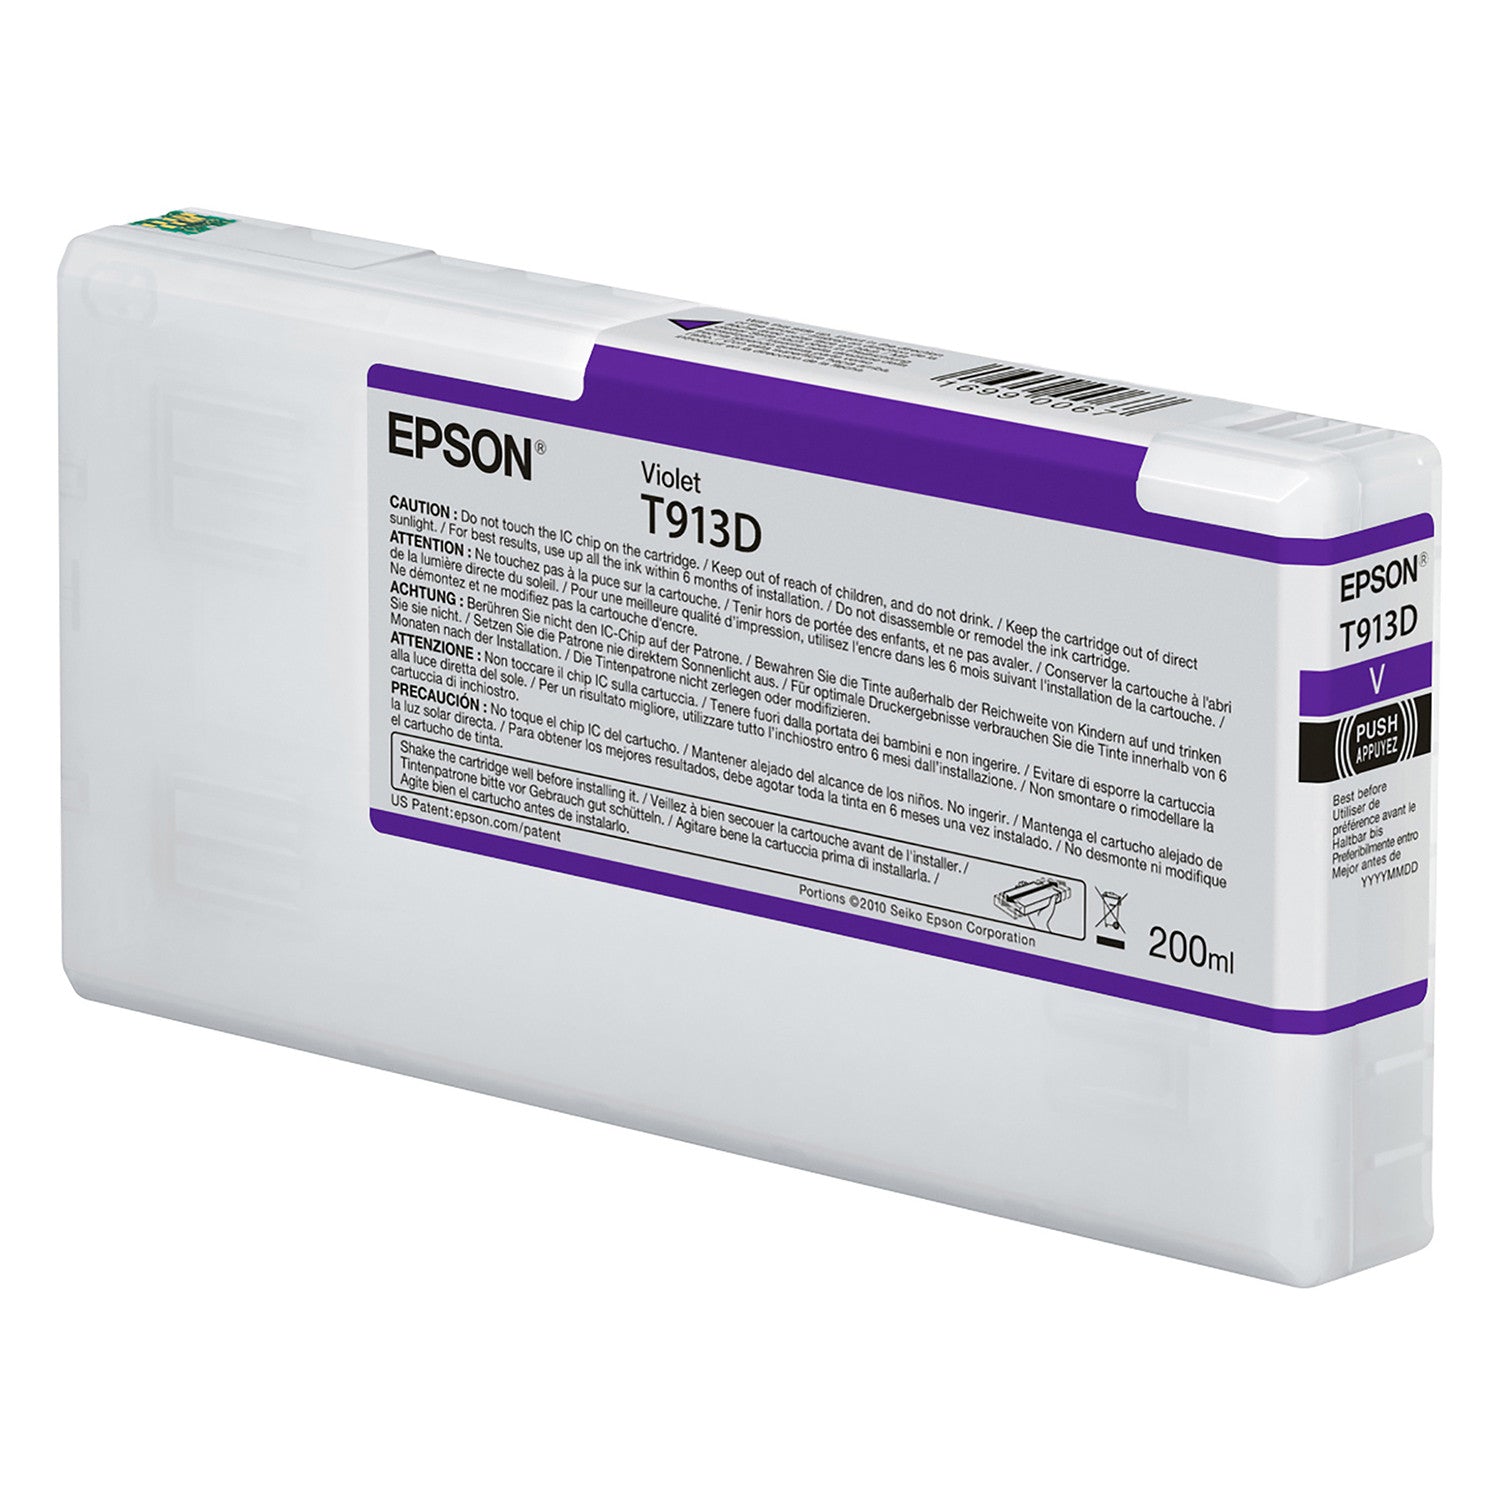 Epson T913D00 P5000 Ultrachrome HD Ink 200ml Violet, papers printer ink, Epson - Pictureline 